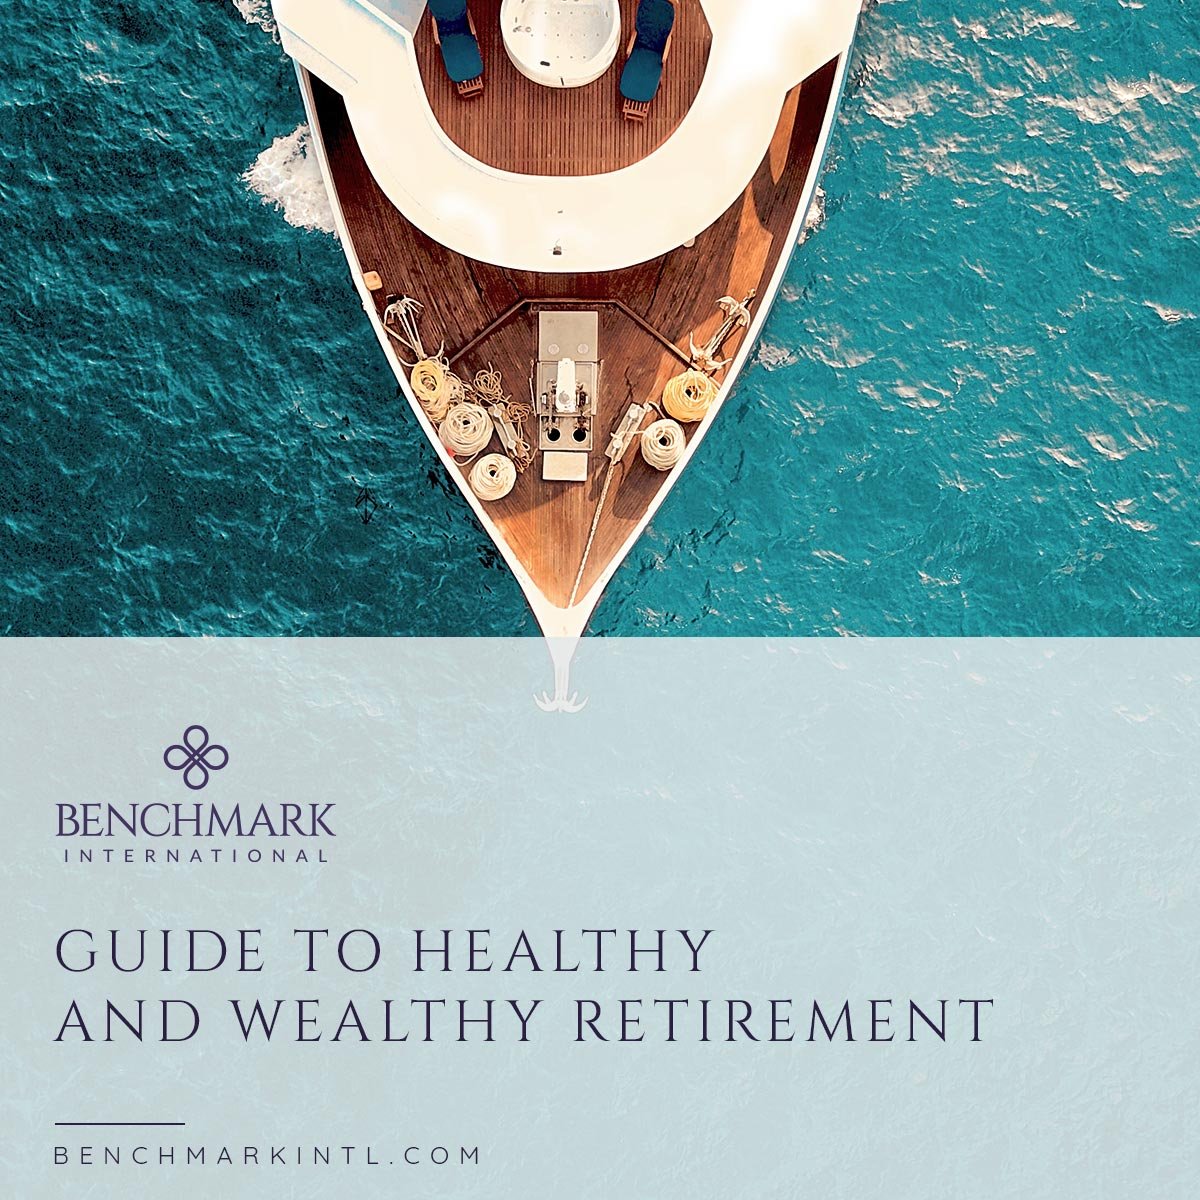 Guide_To_Healthy_and_Wealthy_Retirement_Social(2)